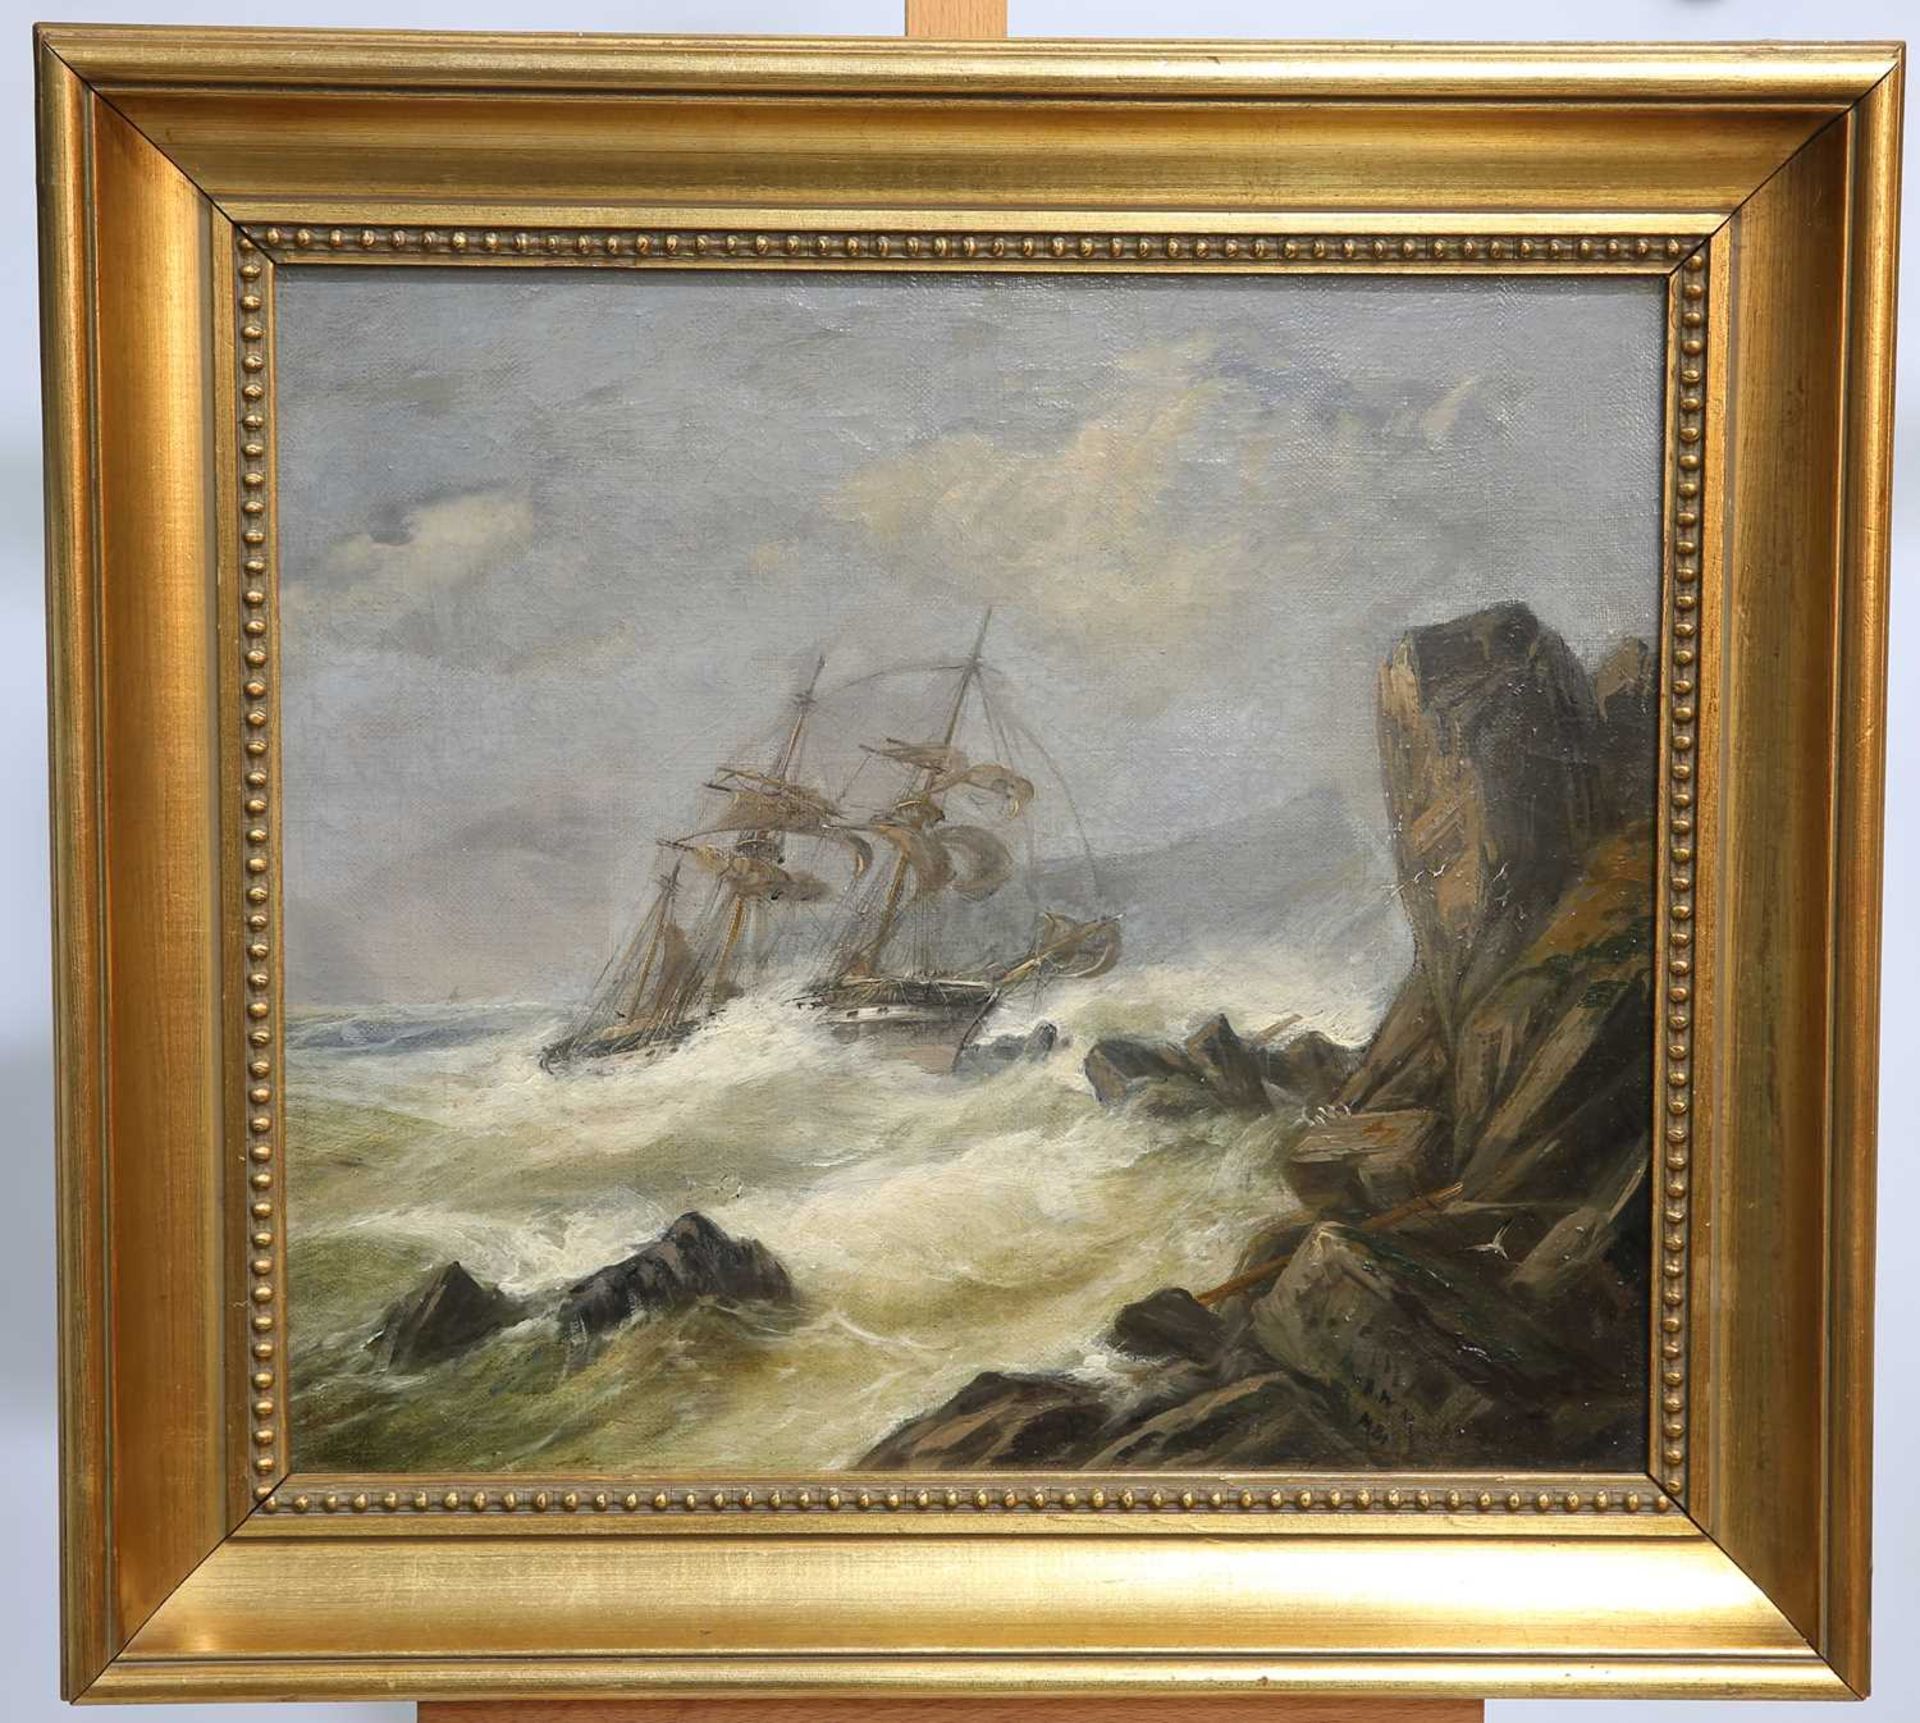 WILLIAM MITCHELL OF MARYPORT (1806-1900) MERCHANT SHIP WRECKED OFF THE COAST - Image 2 of 3